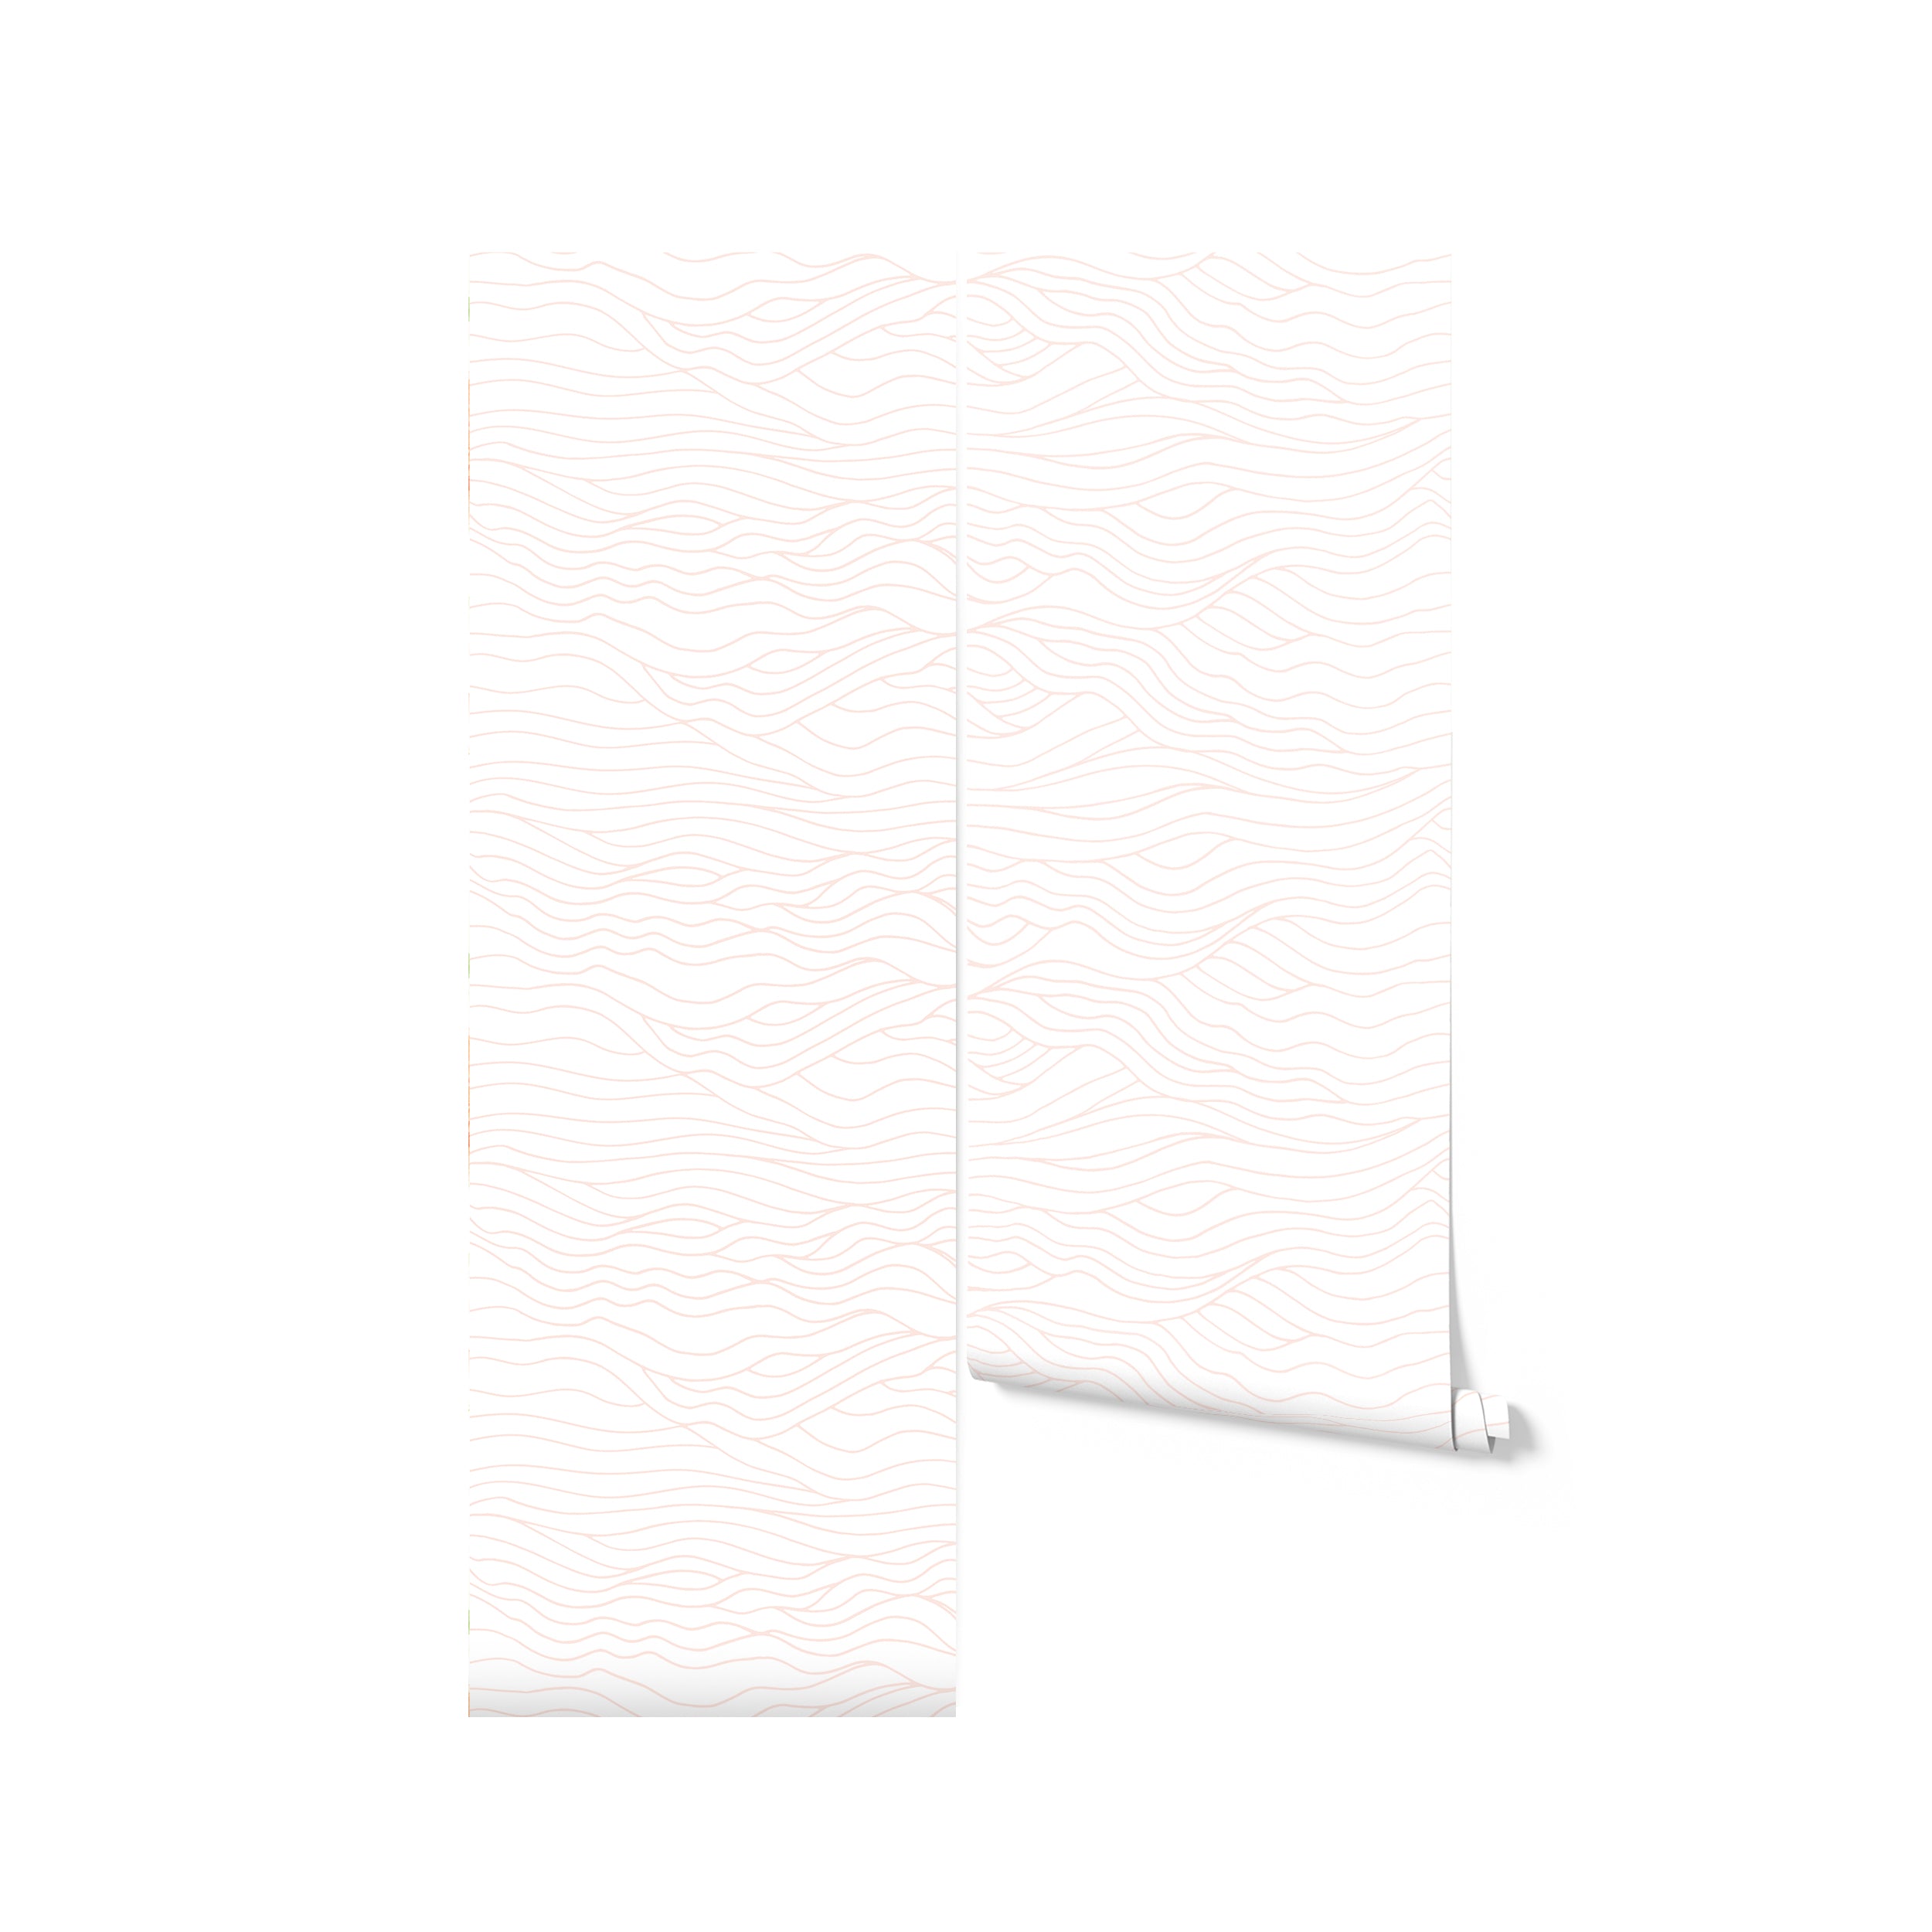 An artistic rendering of the Line Art Wave Wallpaper as it might appear unrolled, with the wallpaper sample displaying its continuous wavy line pattern that flows across the canvas, giving a sense of movement and a hand-drawn aesthetic.